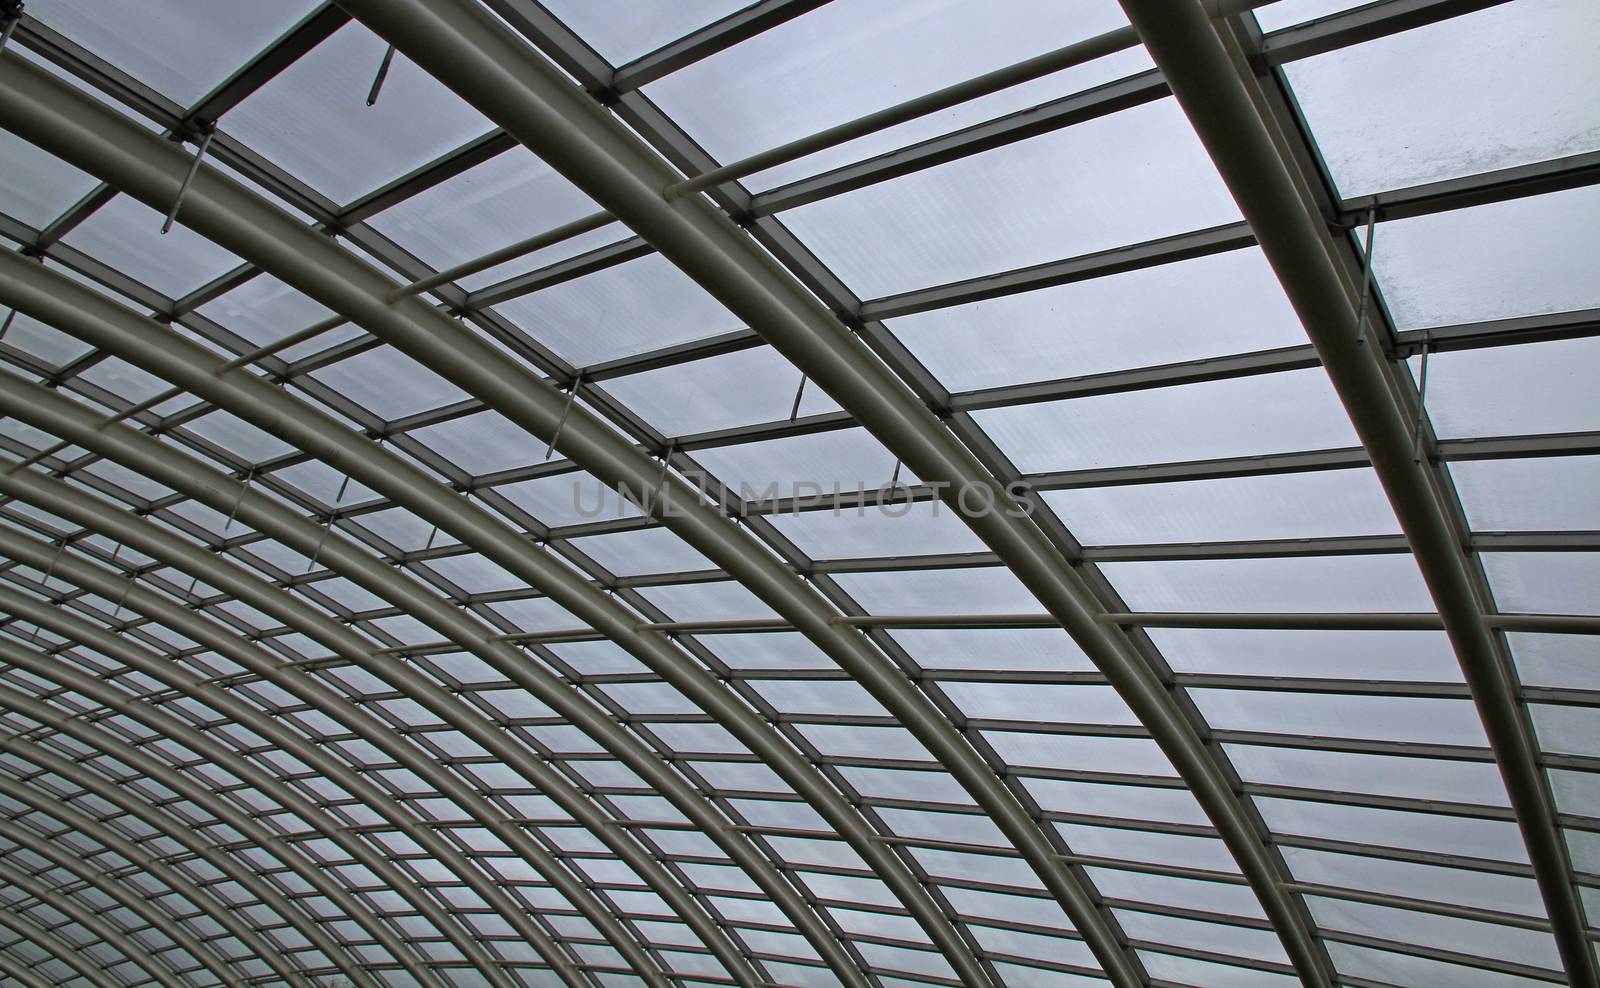 Abstract of a curved glass roof by gary_parker